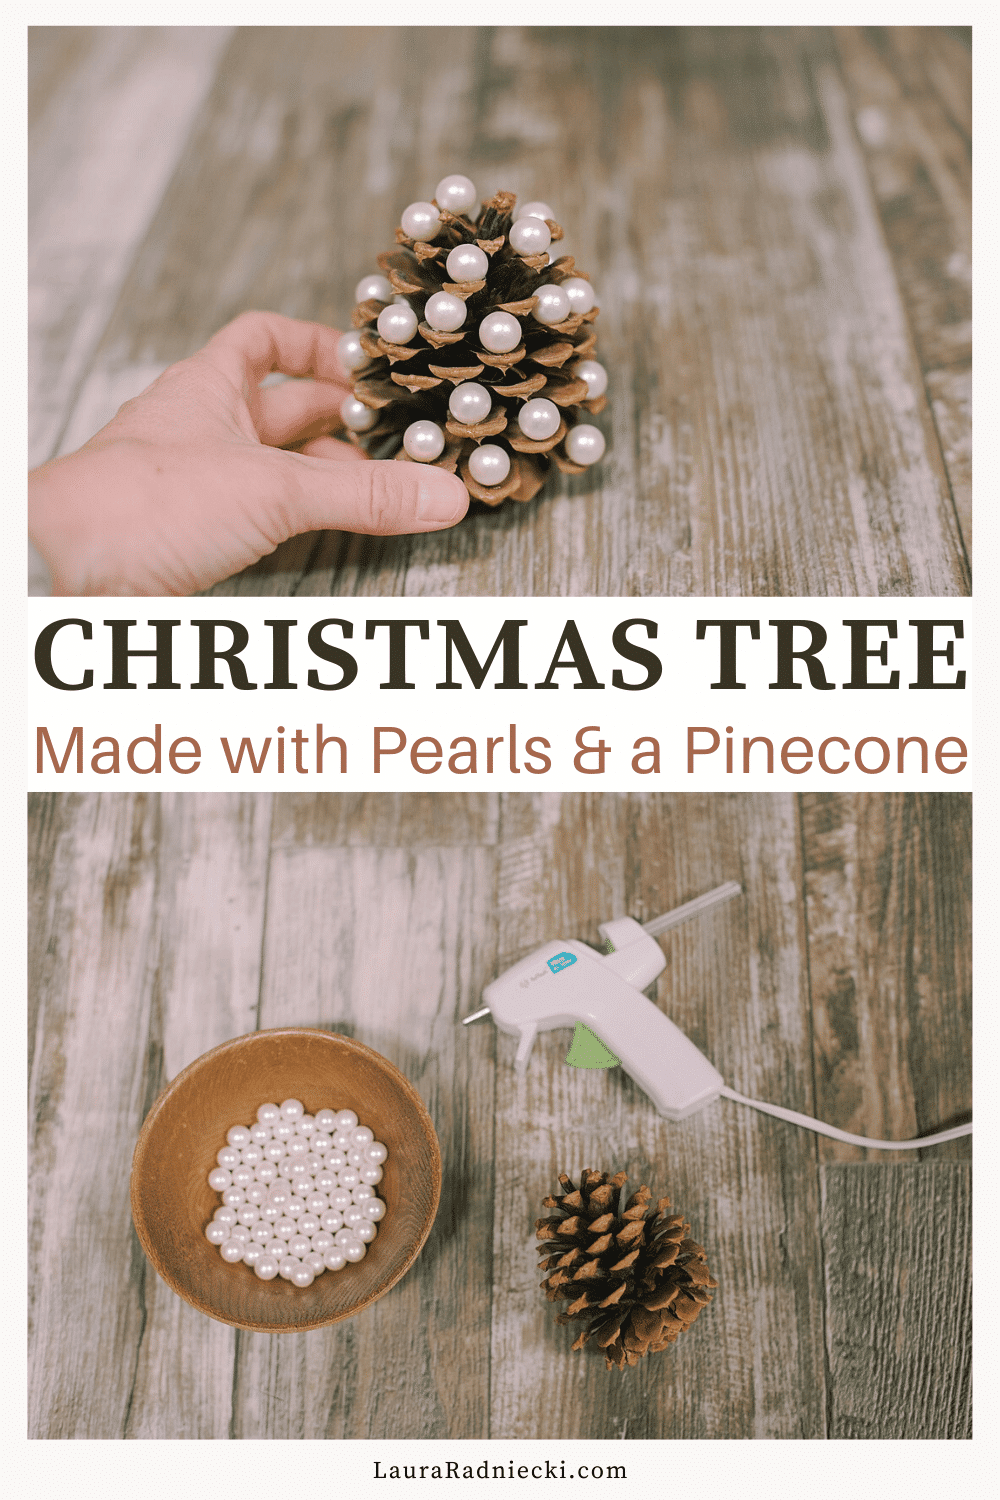 How to Make a Pearl Pinecone Christmas Tree